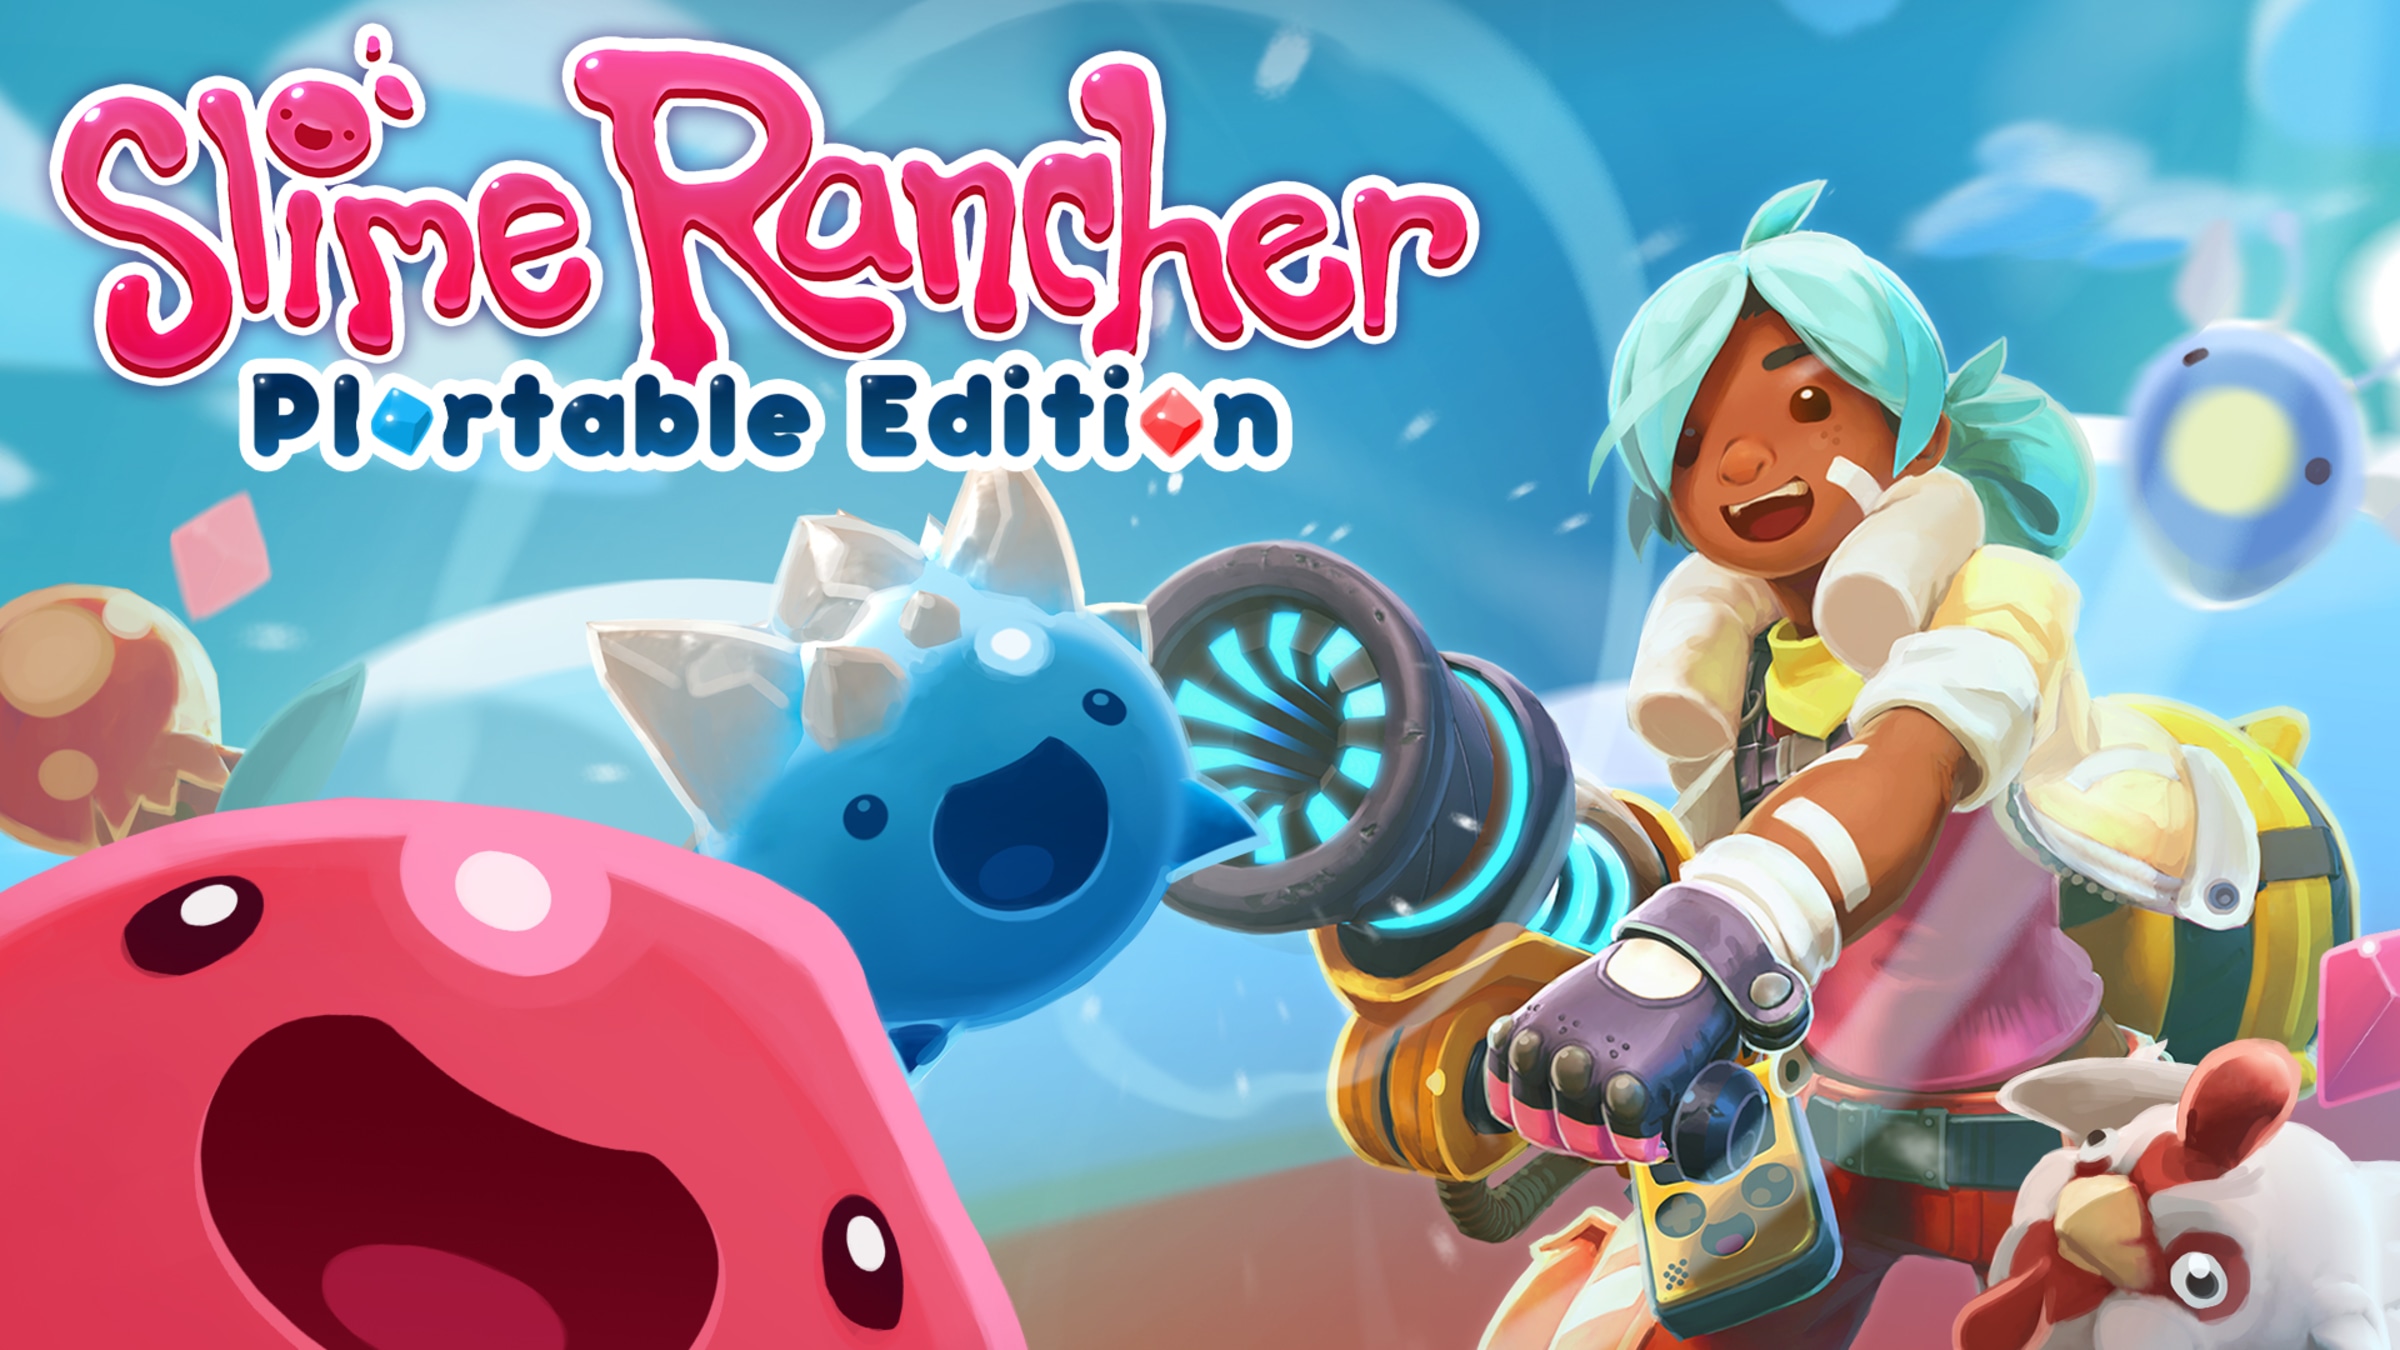 Slime Rancher: Plortable Edition for Nintendo Switch - Nintendo Official Site